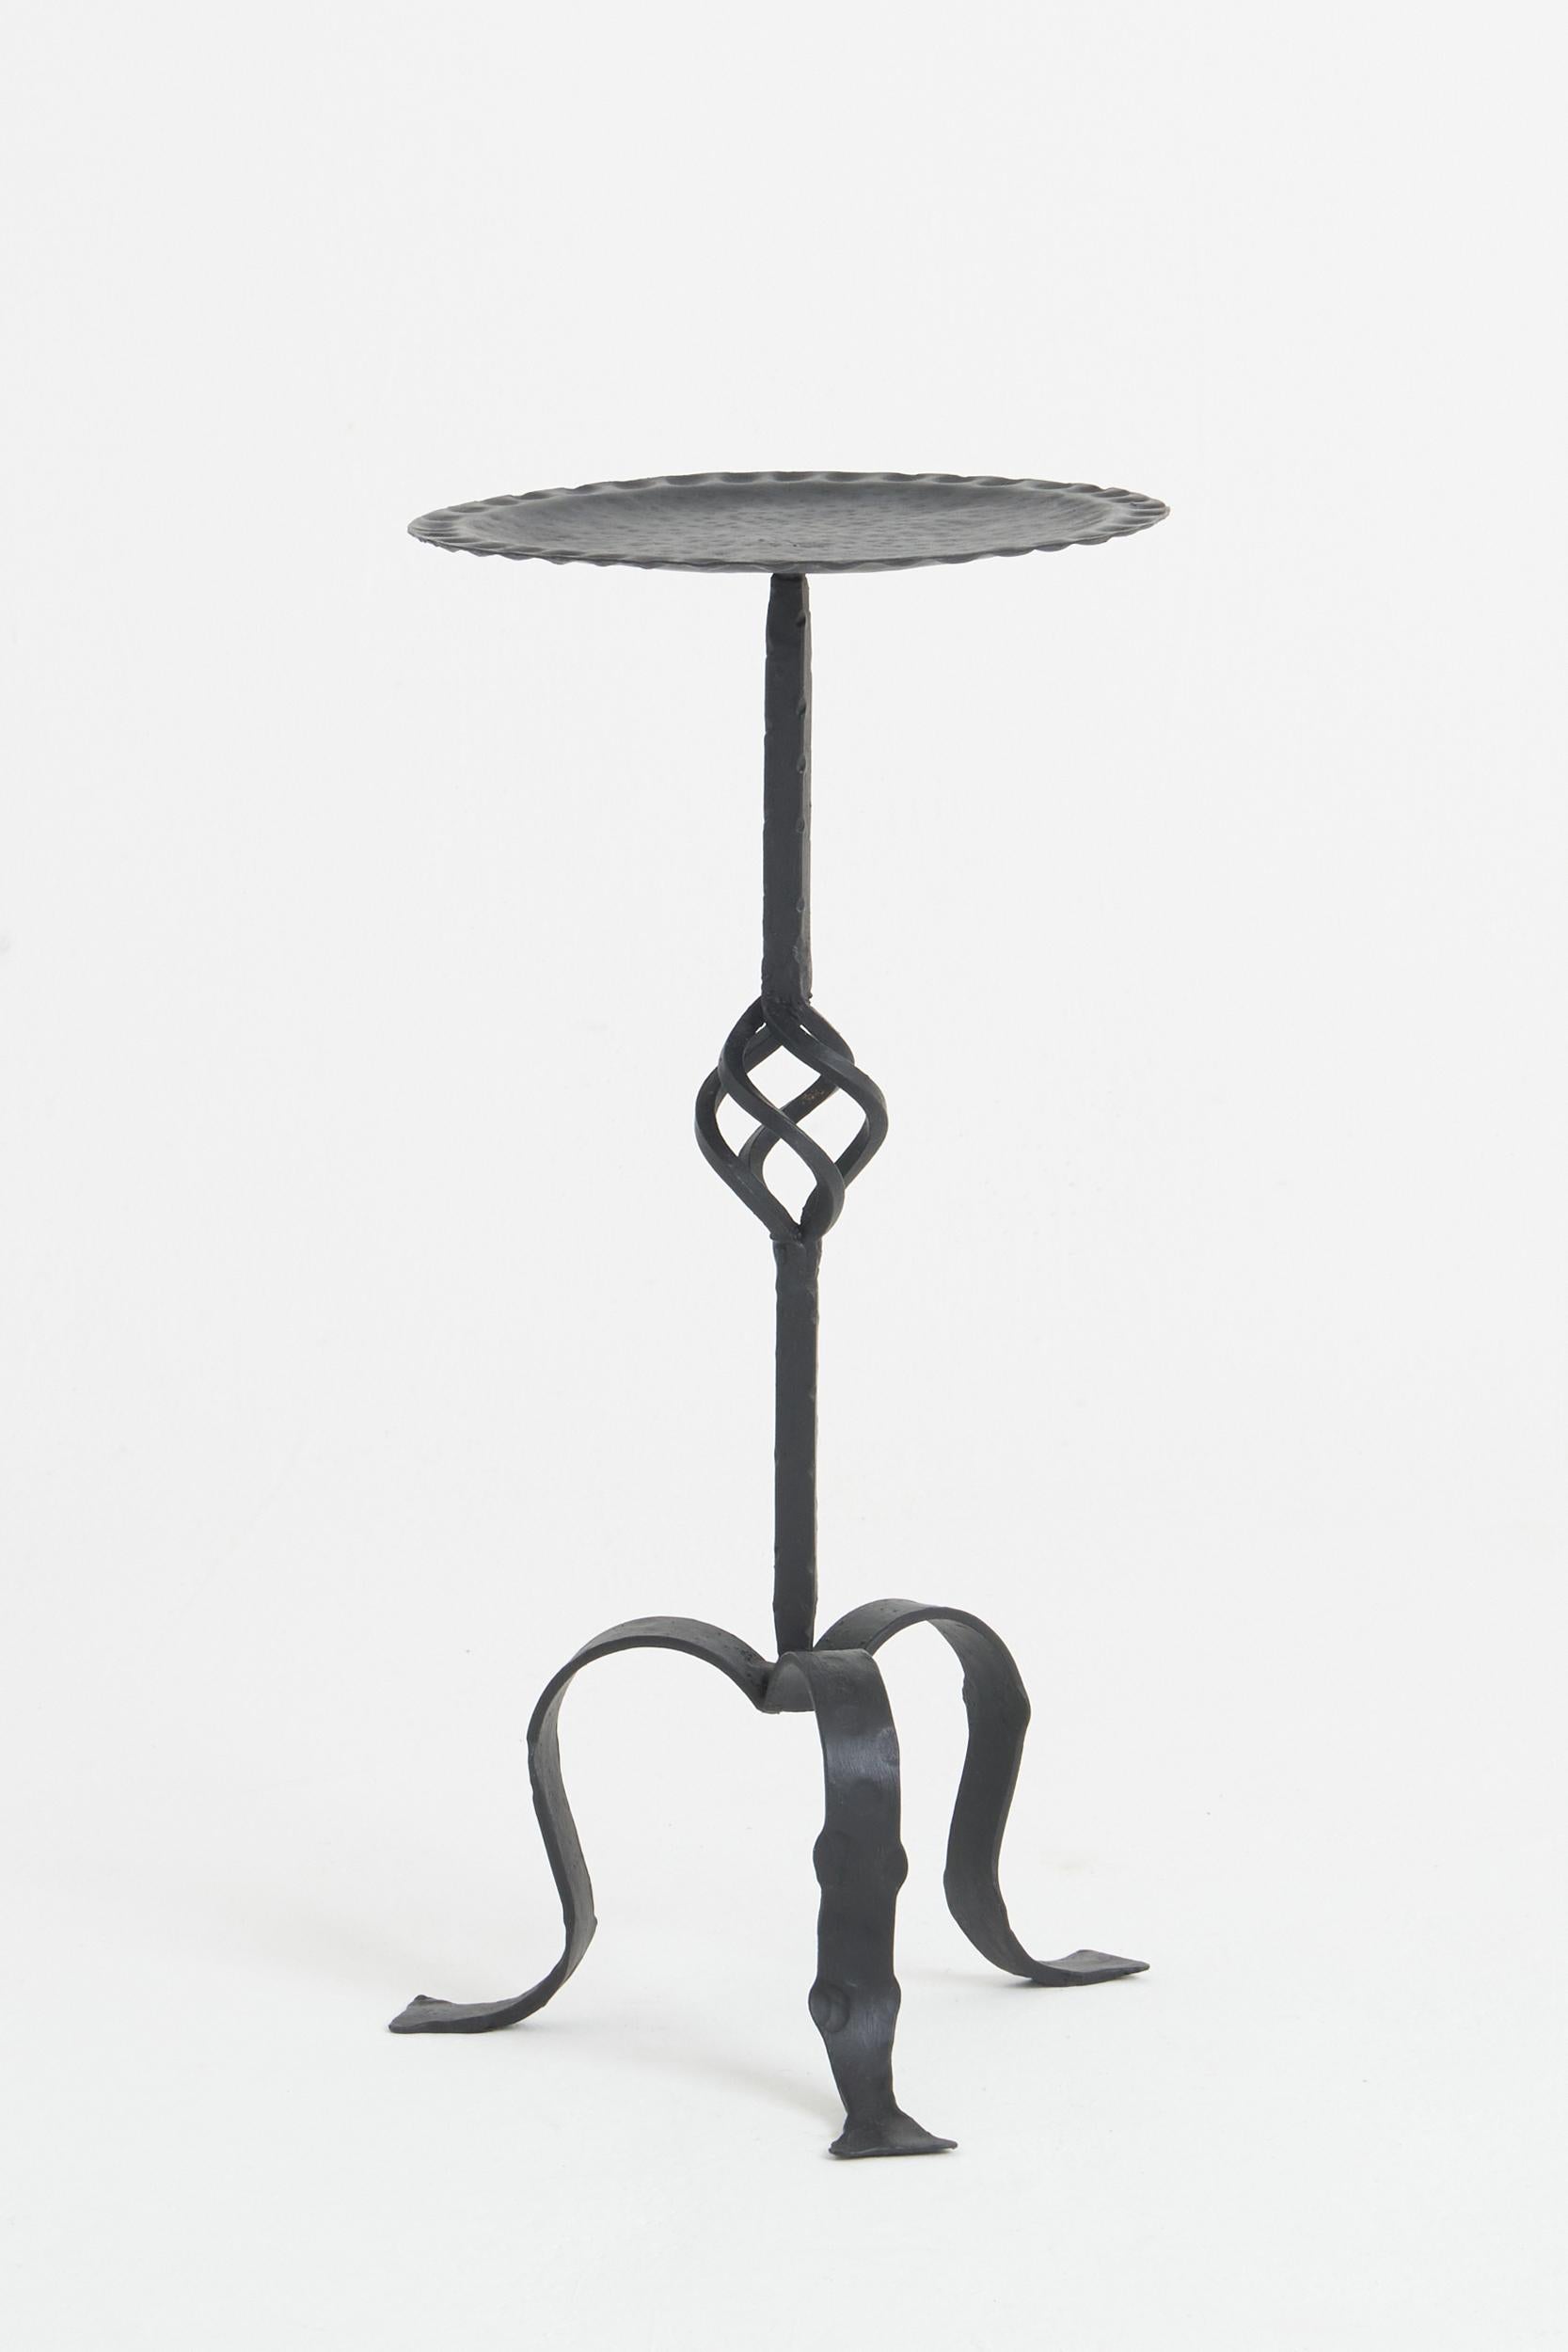 A black enamelled wrought iron martini table.
Spain, mid 20th Century
62 cm high by 30 cm diameter